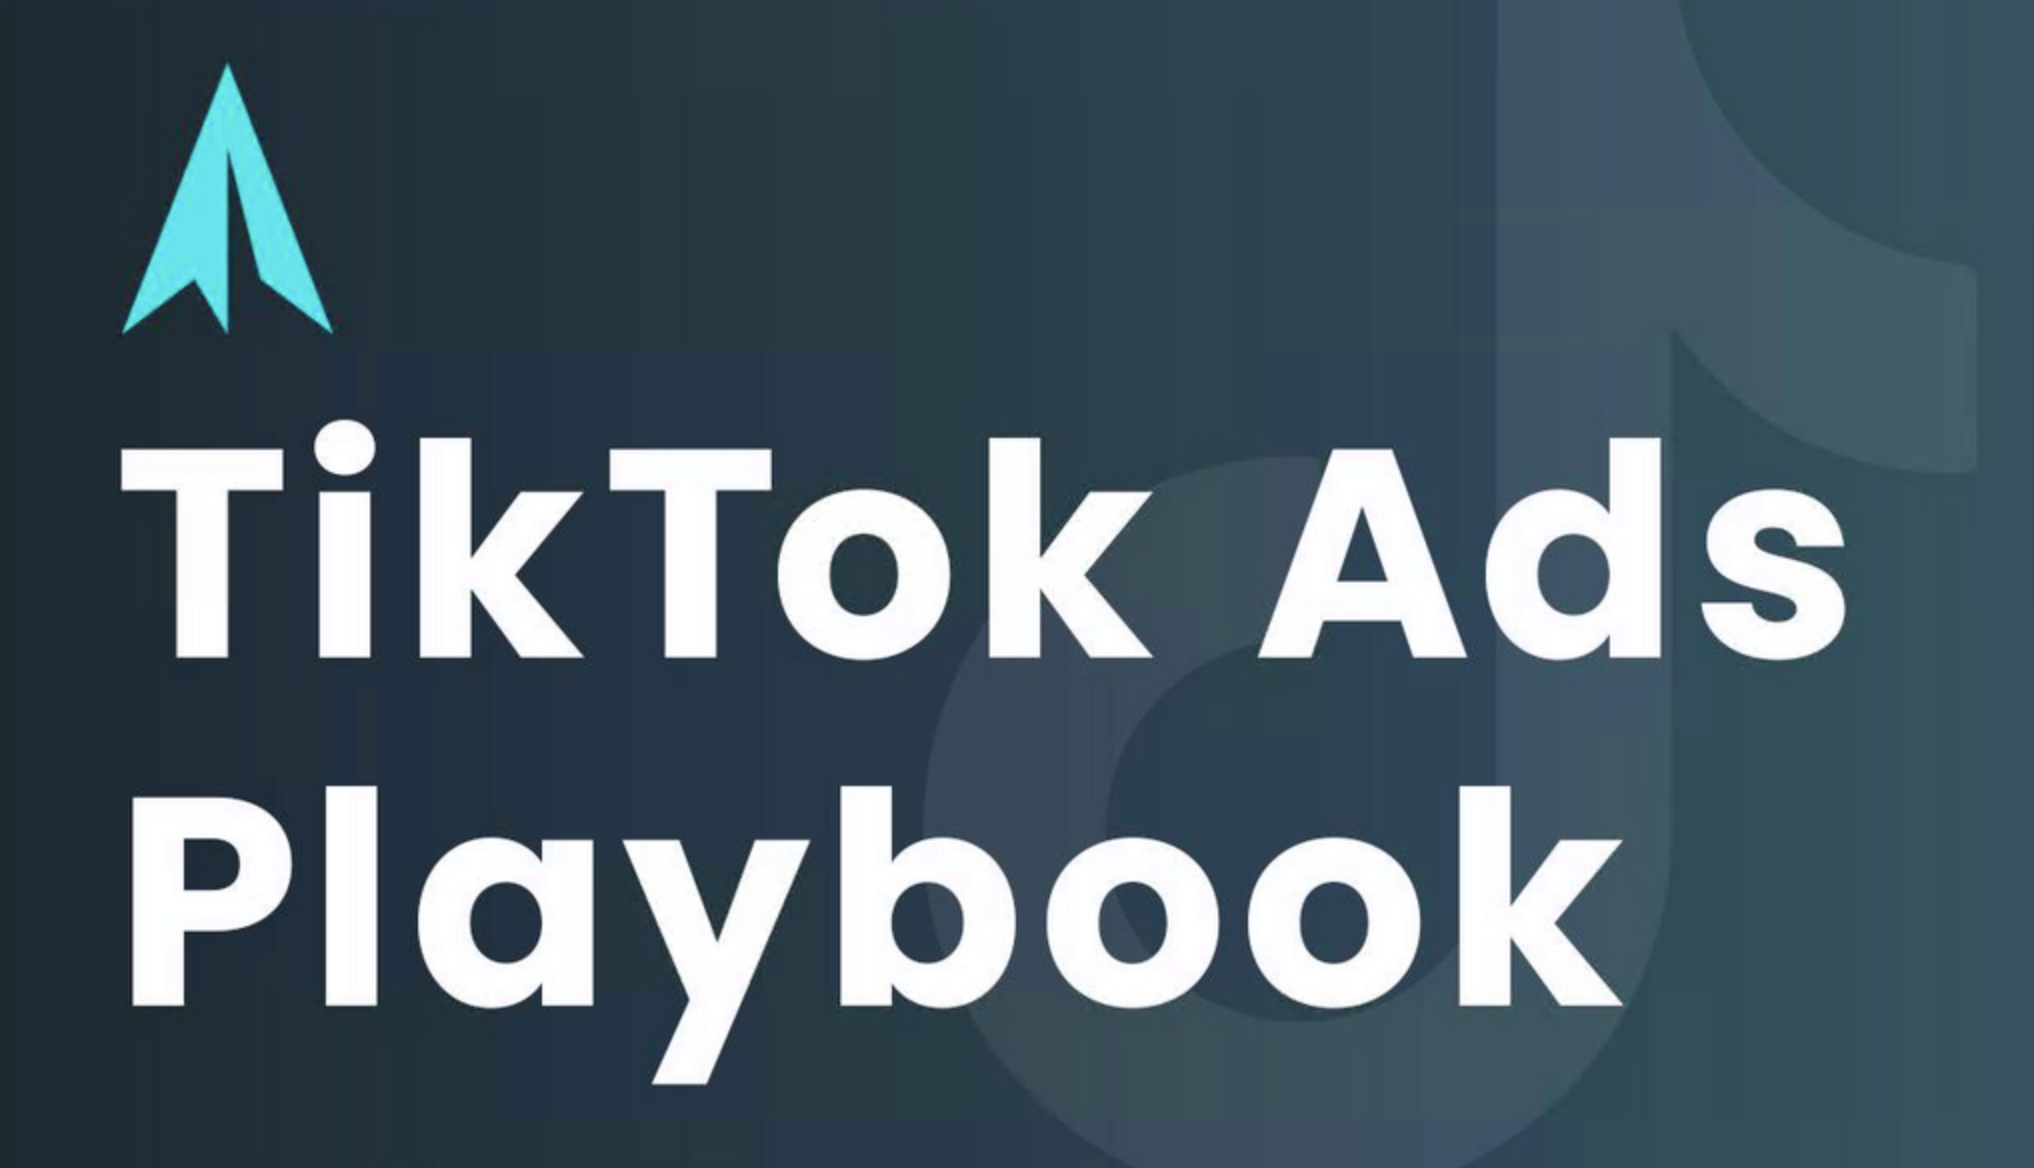 Read more about the article ADmission â€“ TikTok Playbook